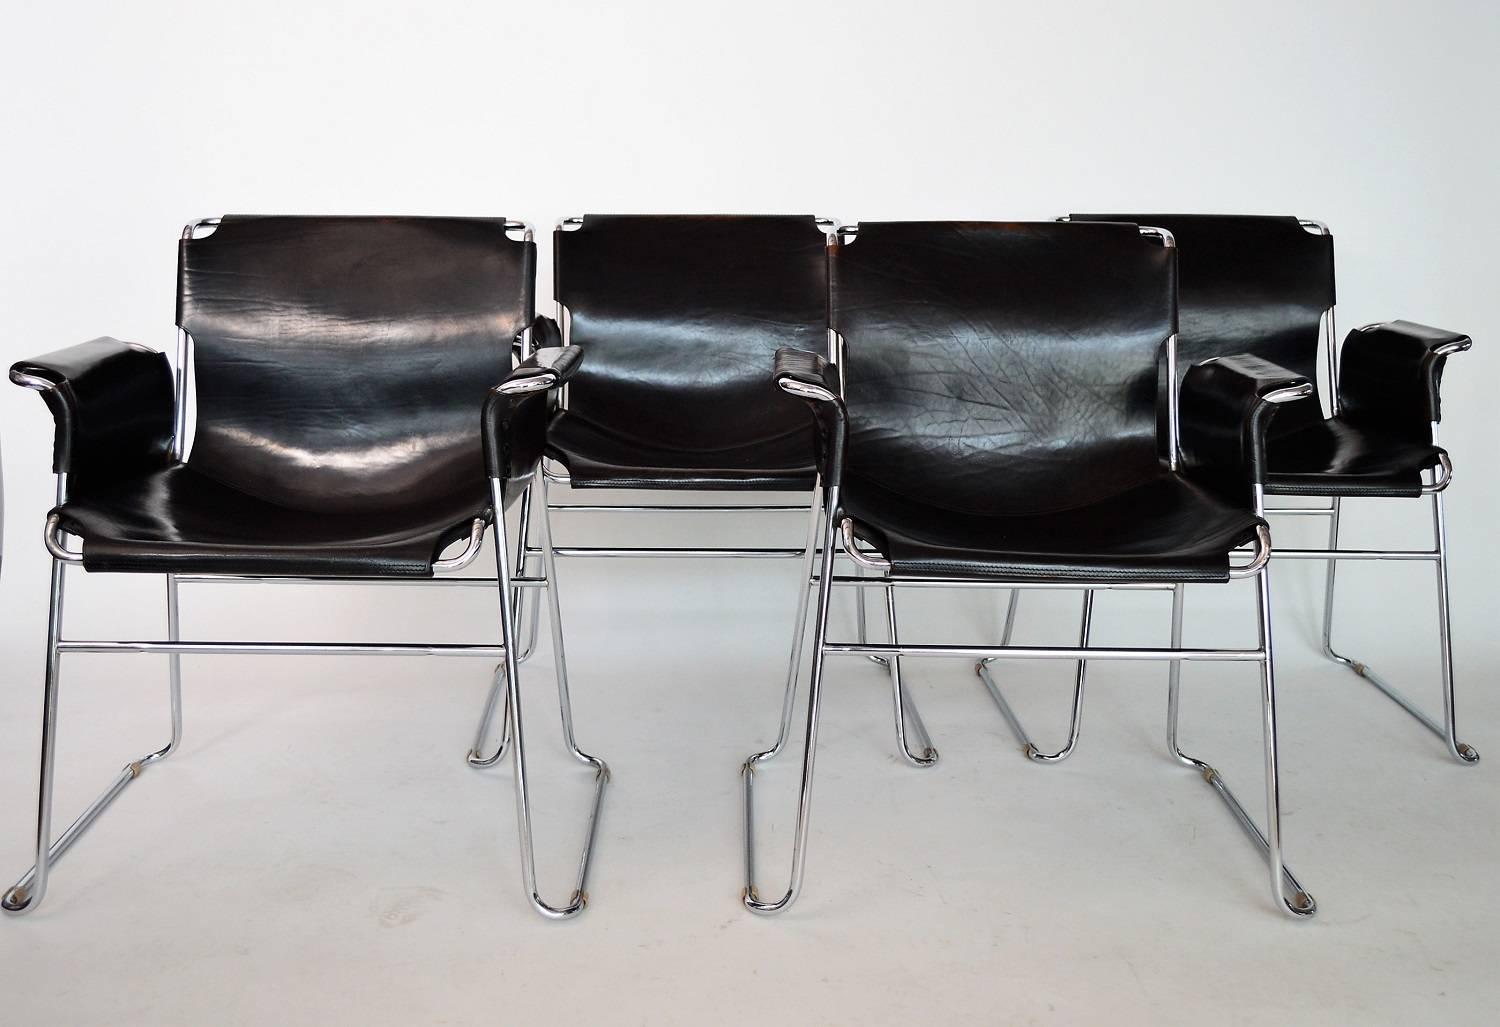 Beautiful set of four chairs made of chromed base frame and thick leather.
Made in Italy, circa 1970s.
The leather is in very good vintage condition with small signs of wear and use, have been cleaned and treated with special leather agents.
The